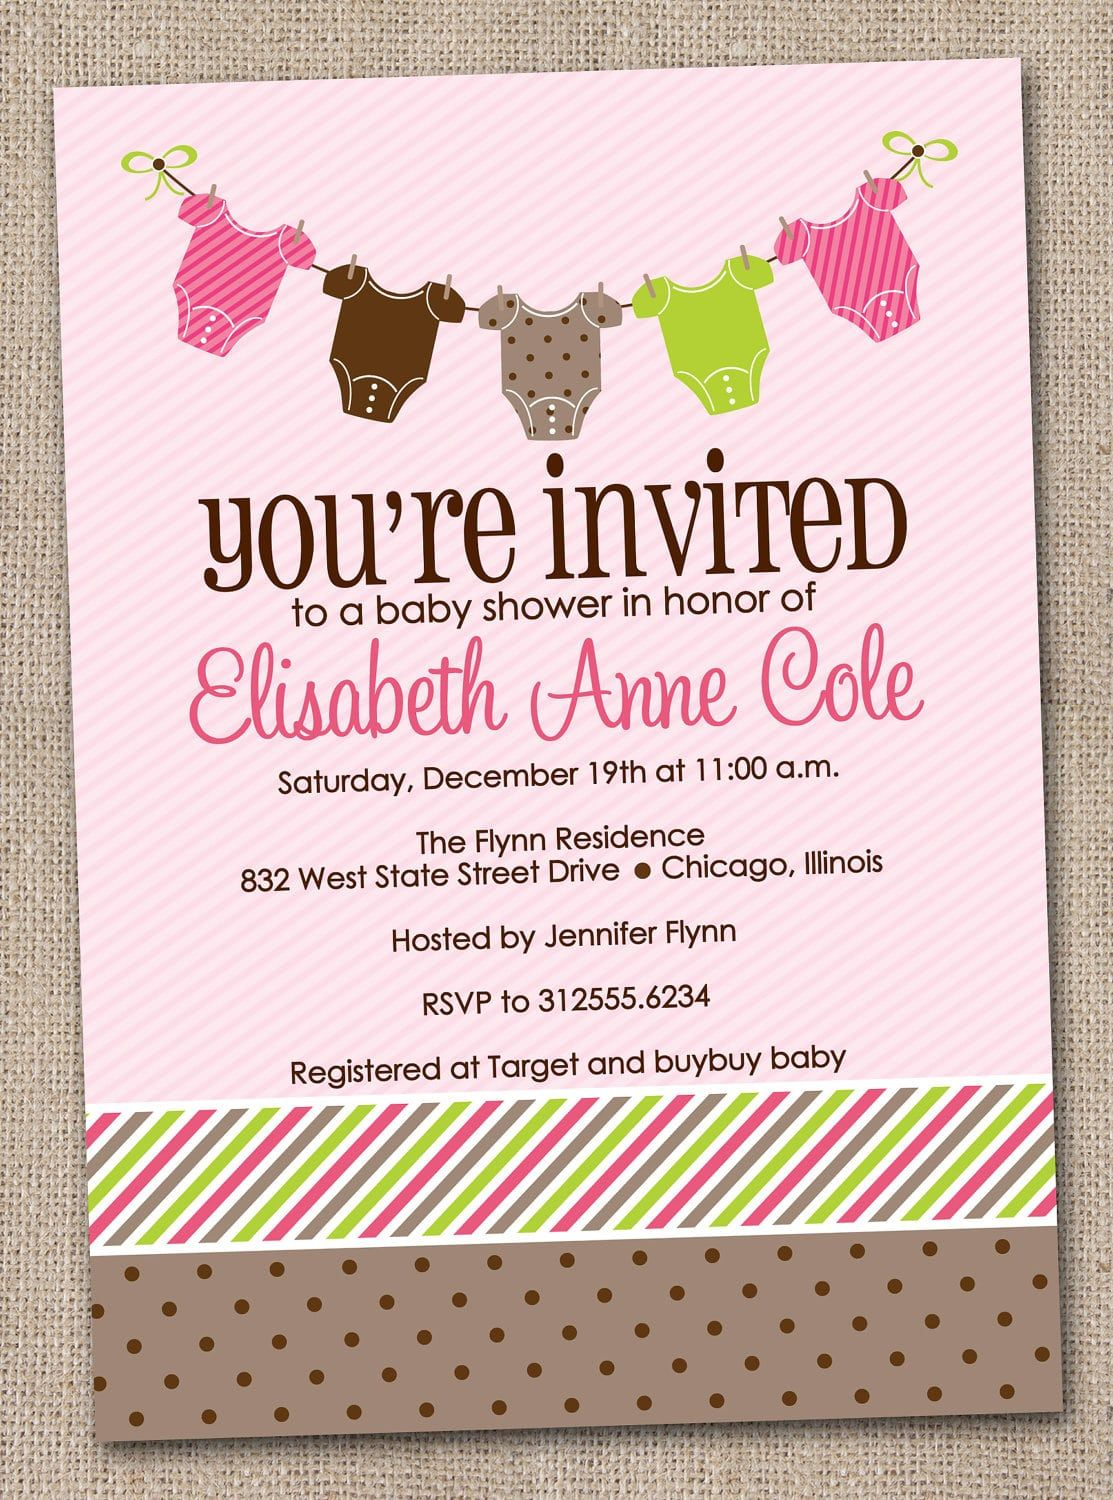 Ba Welcome Party Invitation Templates Sweet Party In 2019 Ba pertaining to measurements 1113 X 1500